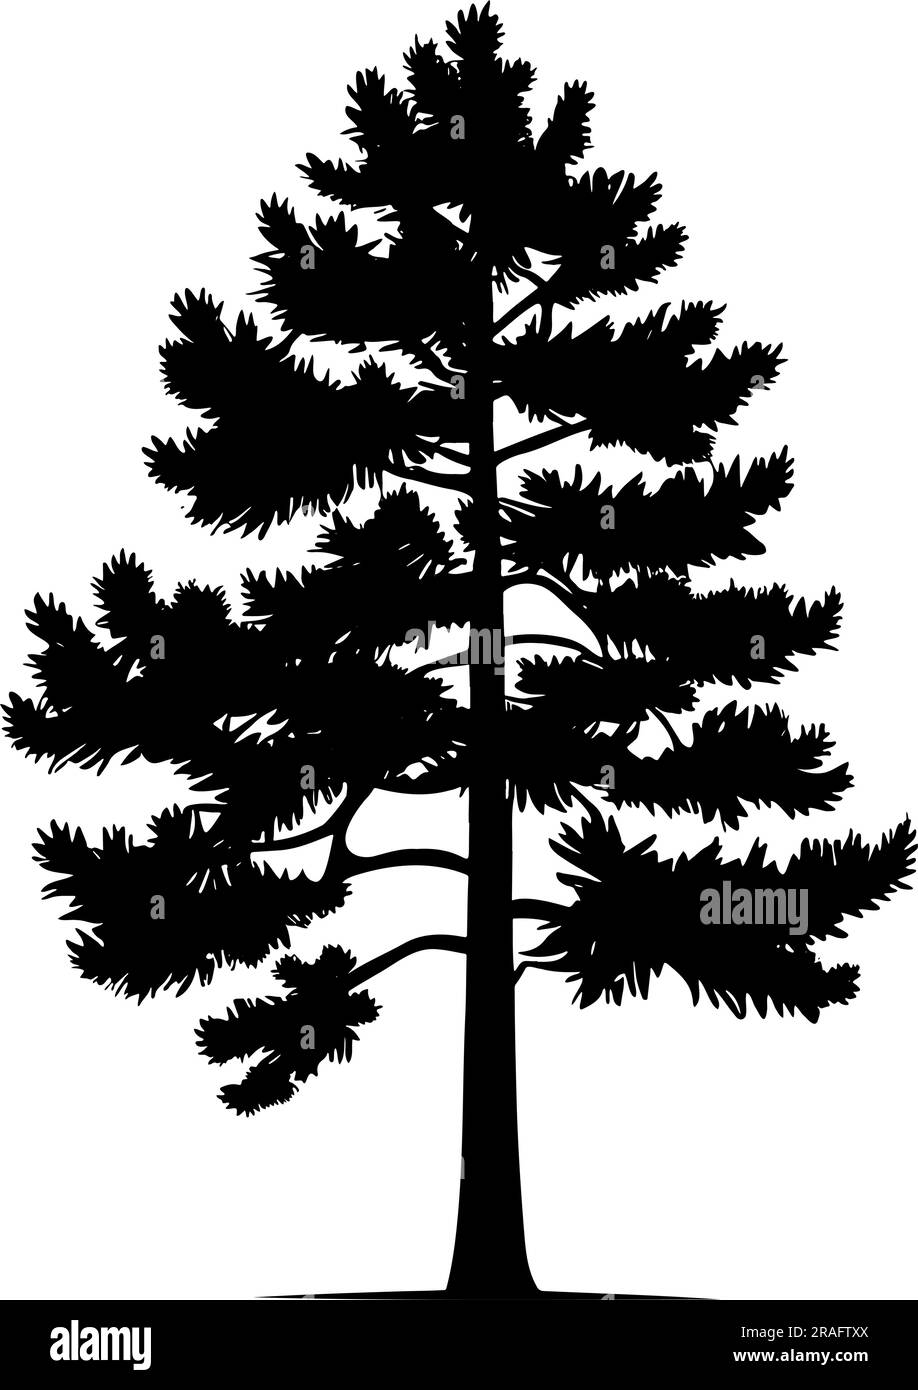 Conifer tree silhouette isolated on white background. vector illustration Stock Vector